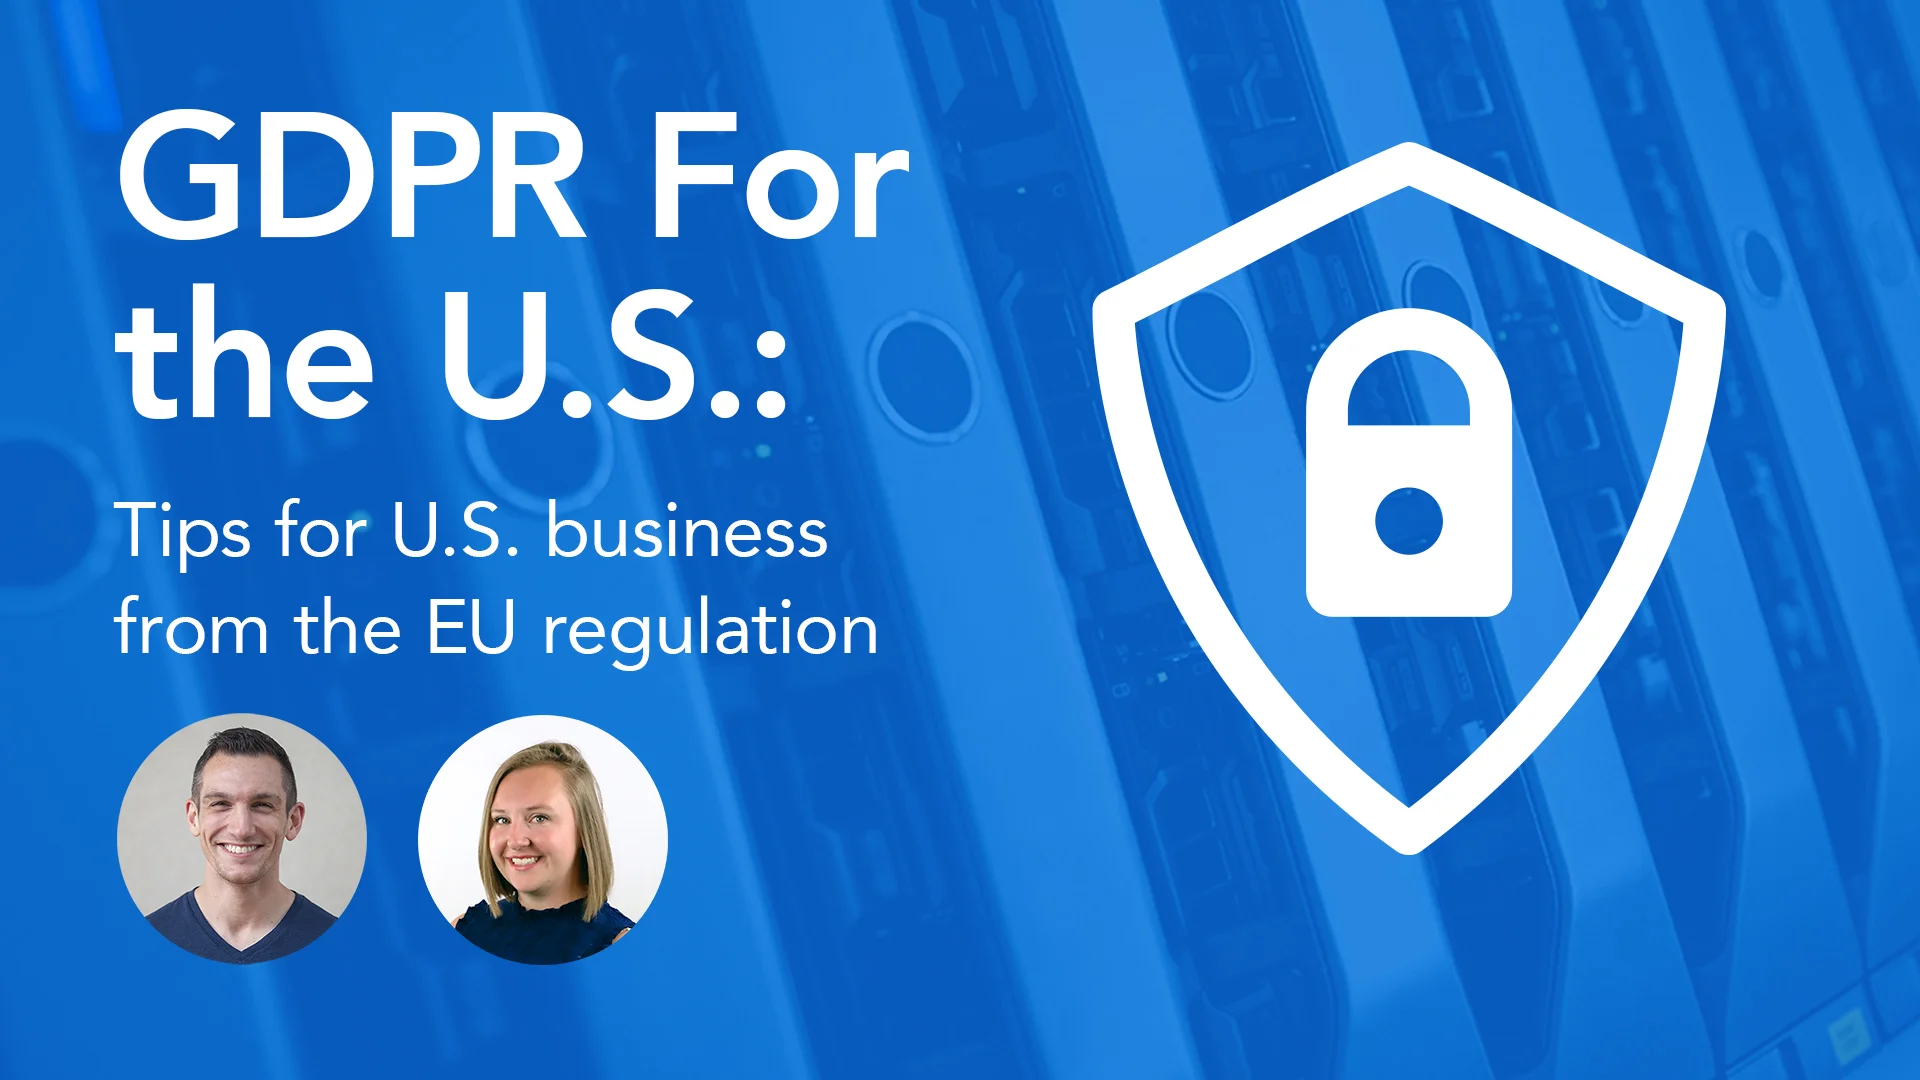 GDPR for the U.S. 